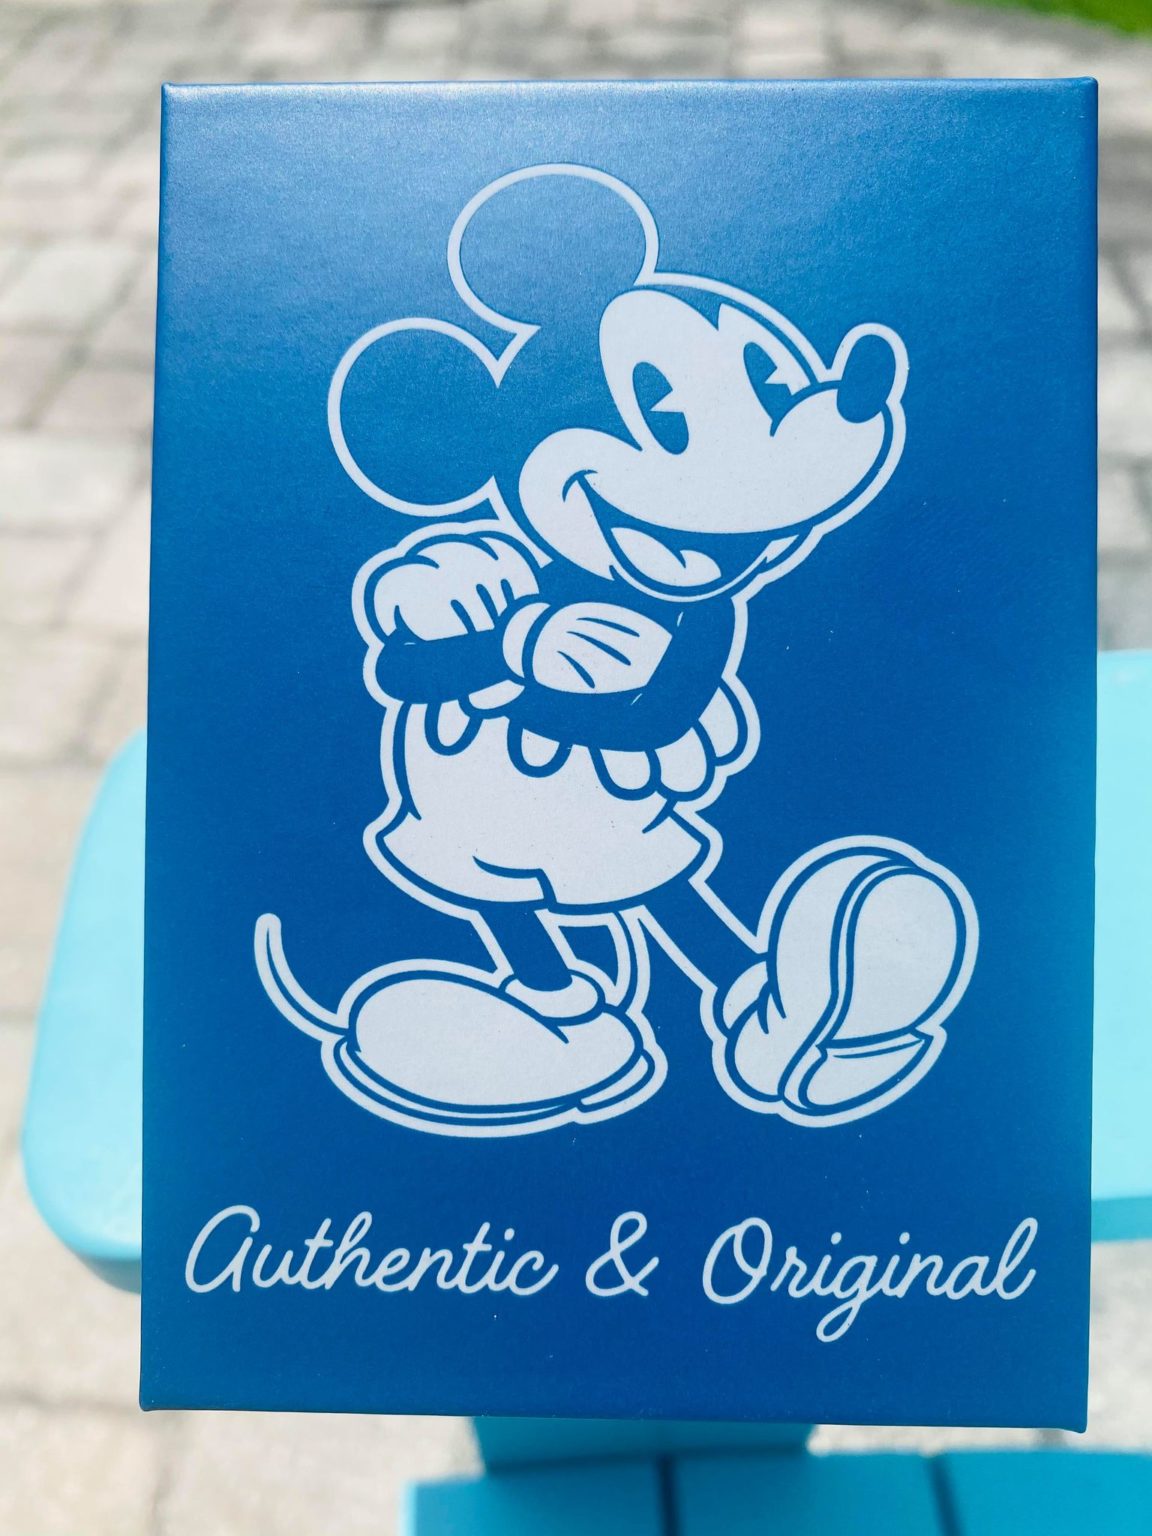 Limited Edition Father's Day MagicBand Available at Disney